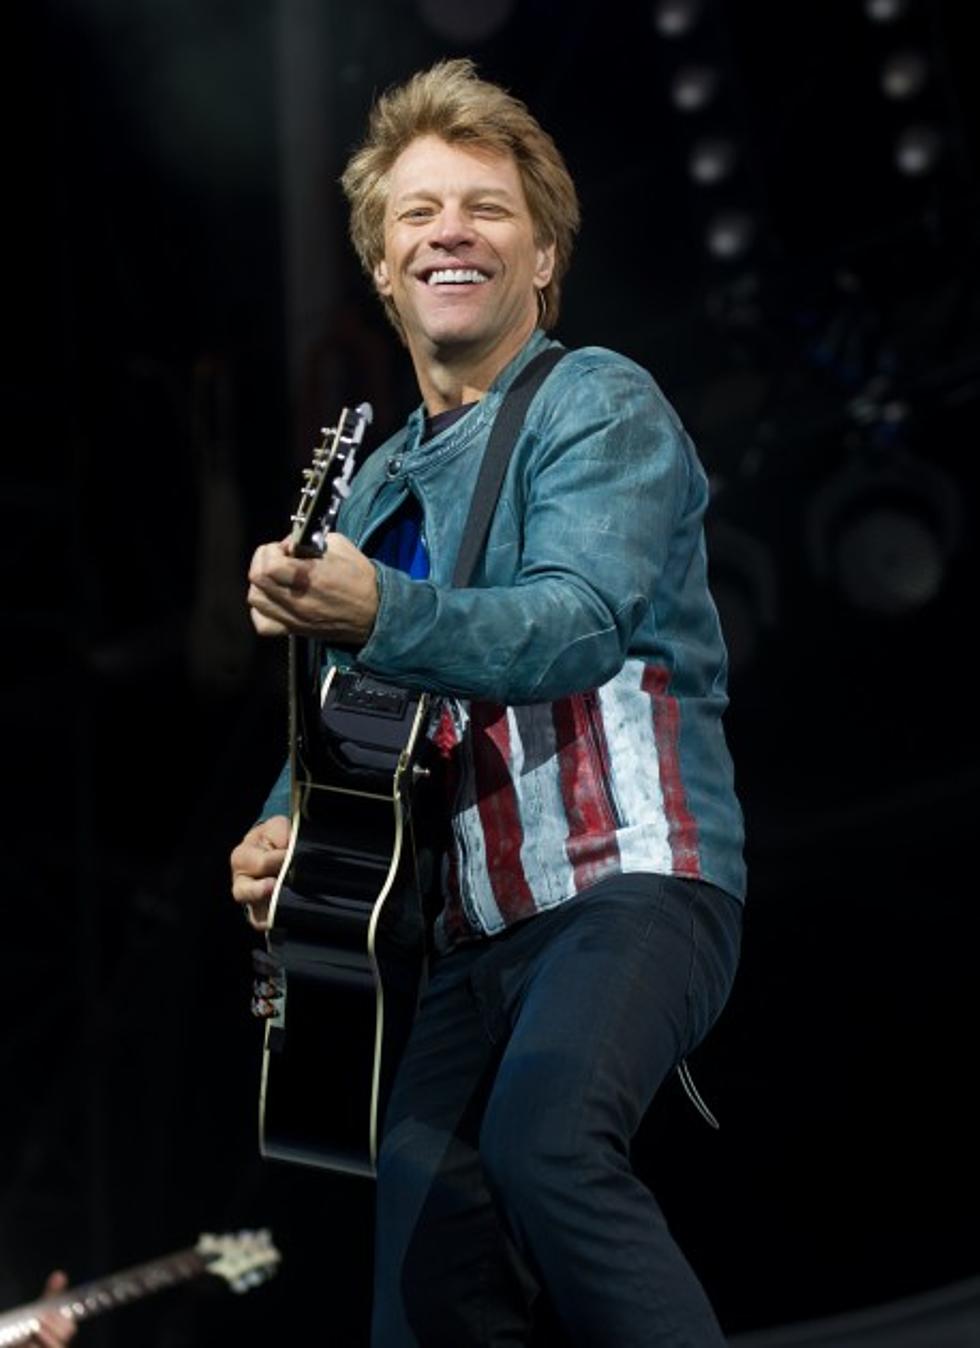 Listen To Jack FM For Your Chance To Win Bon Jovi Tickets!